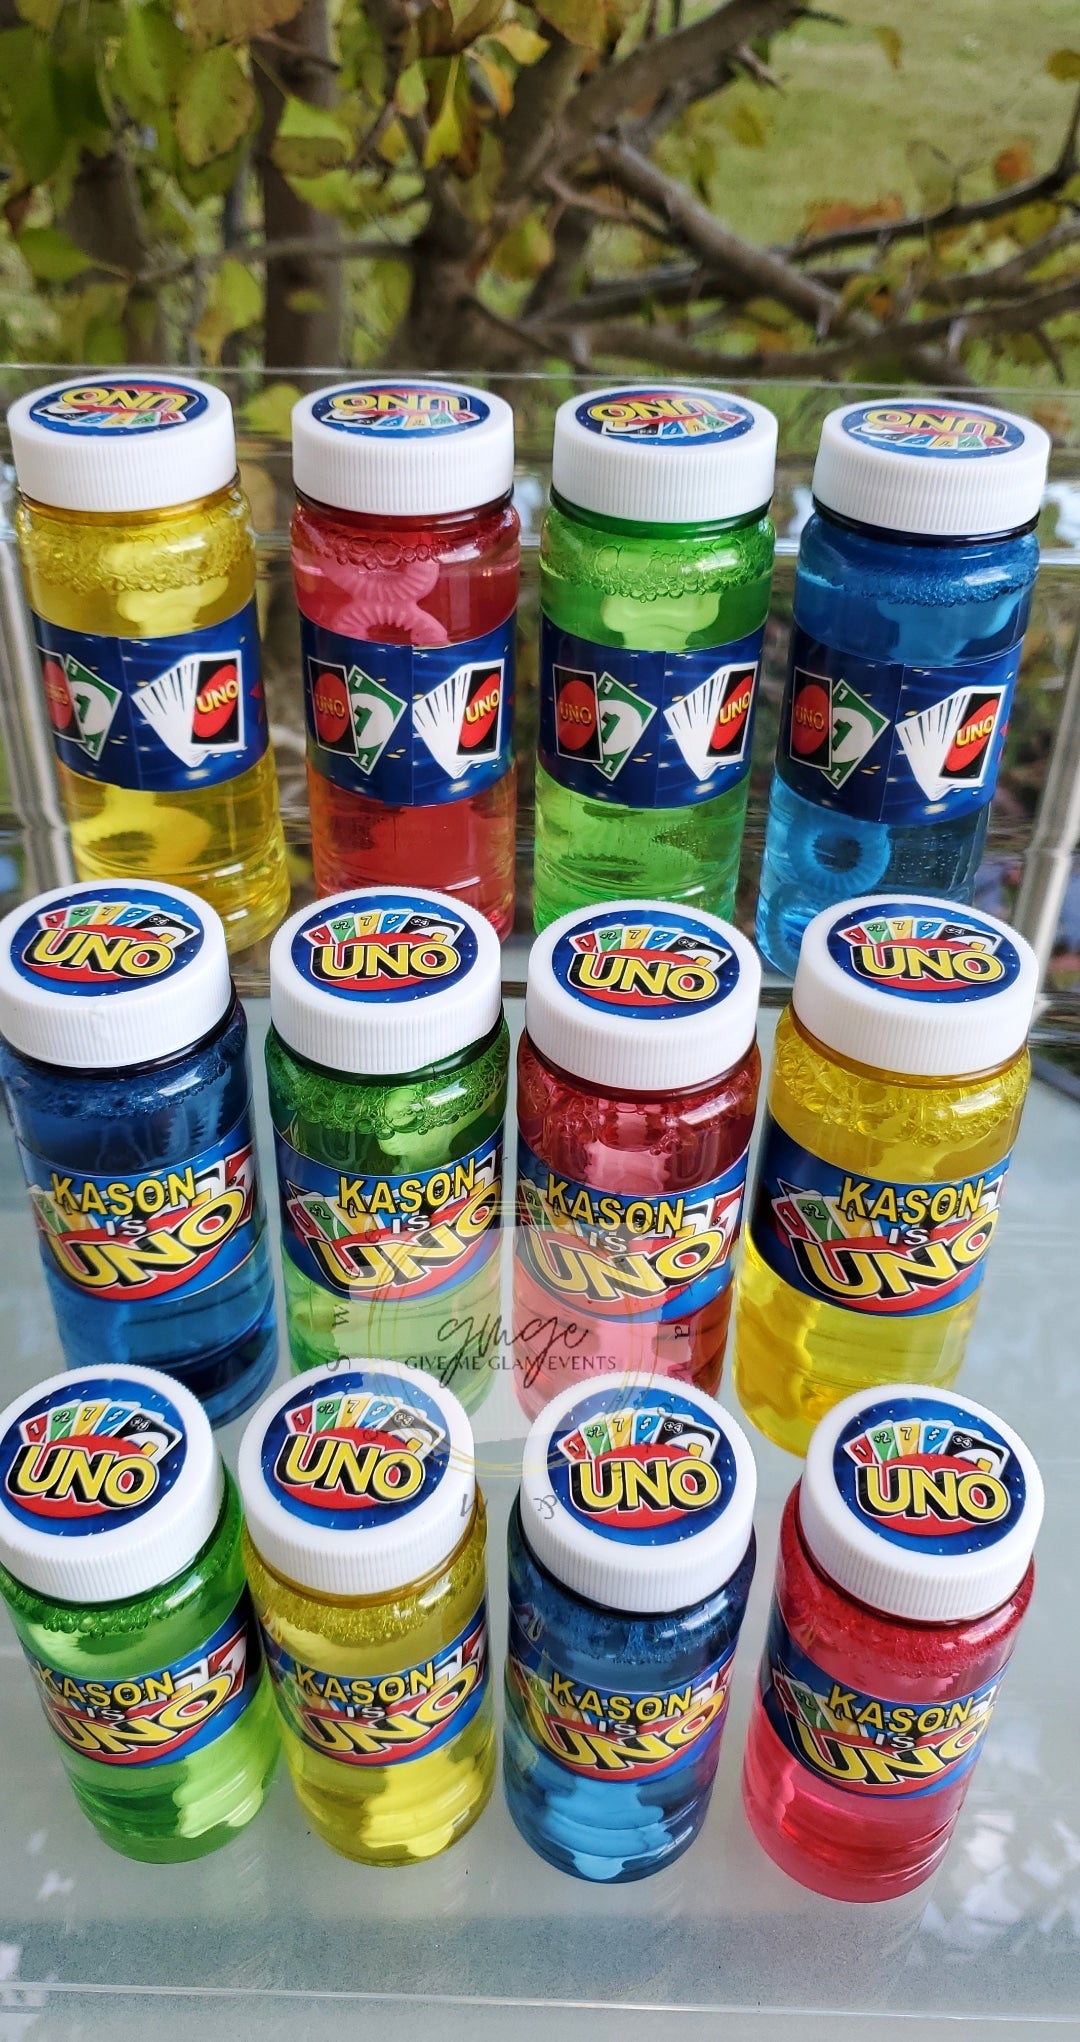 Uno themed party favors made with used but cleaned and disinfected